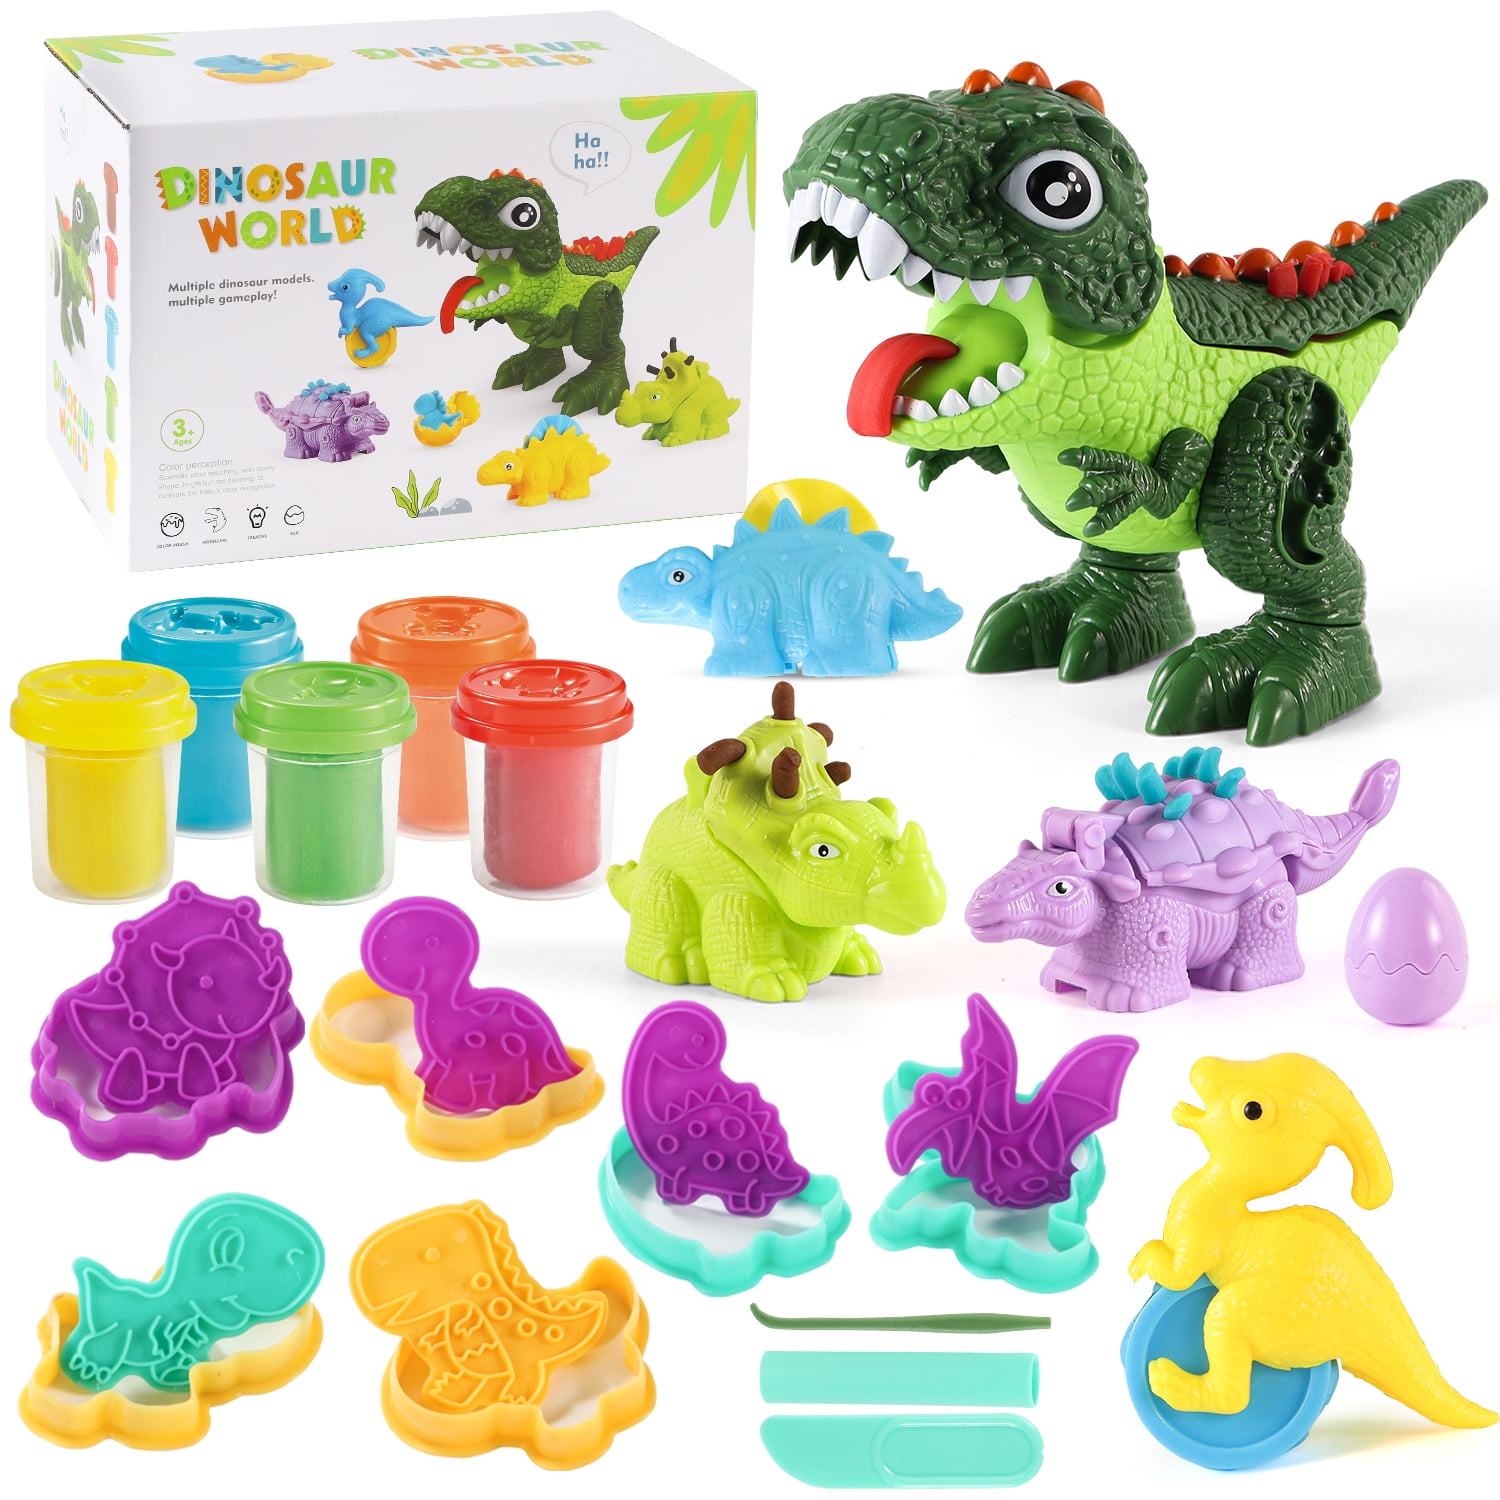 Playdough Birthday Party Sets Girls Boys Soft Fun Accessories Storage bag T rex Art Gifts Outdoors and Indoors for Toddlers Kids Age 3 4 5 6 7 8 Princeplay Dinosaur Toddlers Toys for Kids Years Old